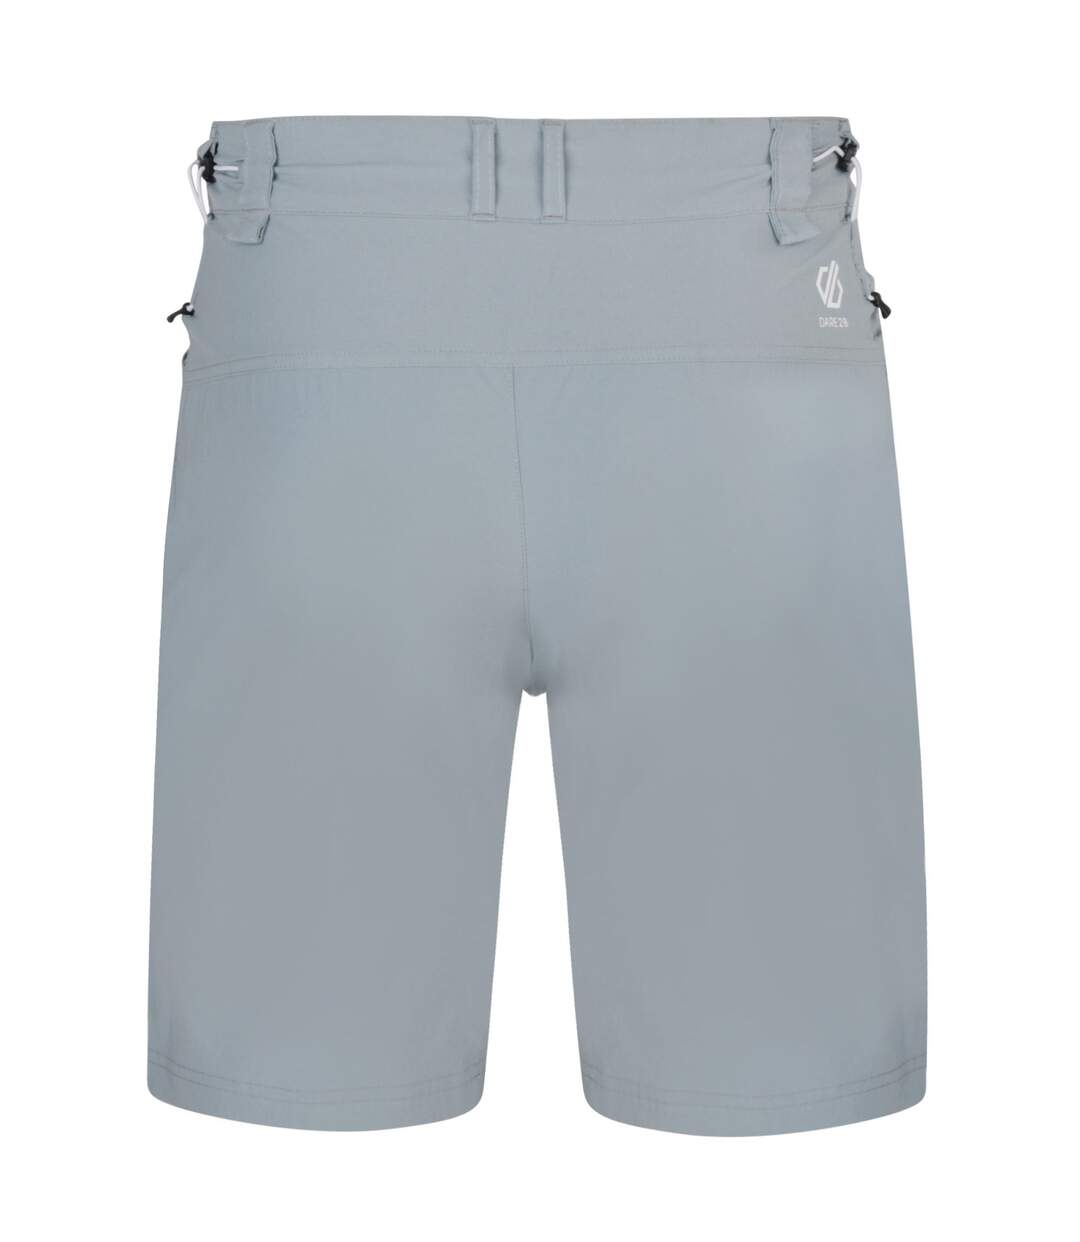 Dare 2B - Short TUNED IN - Homme (Gris clair) - UTRG4078